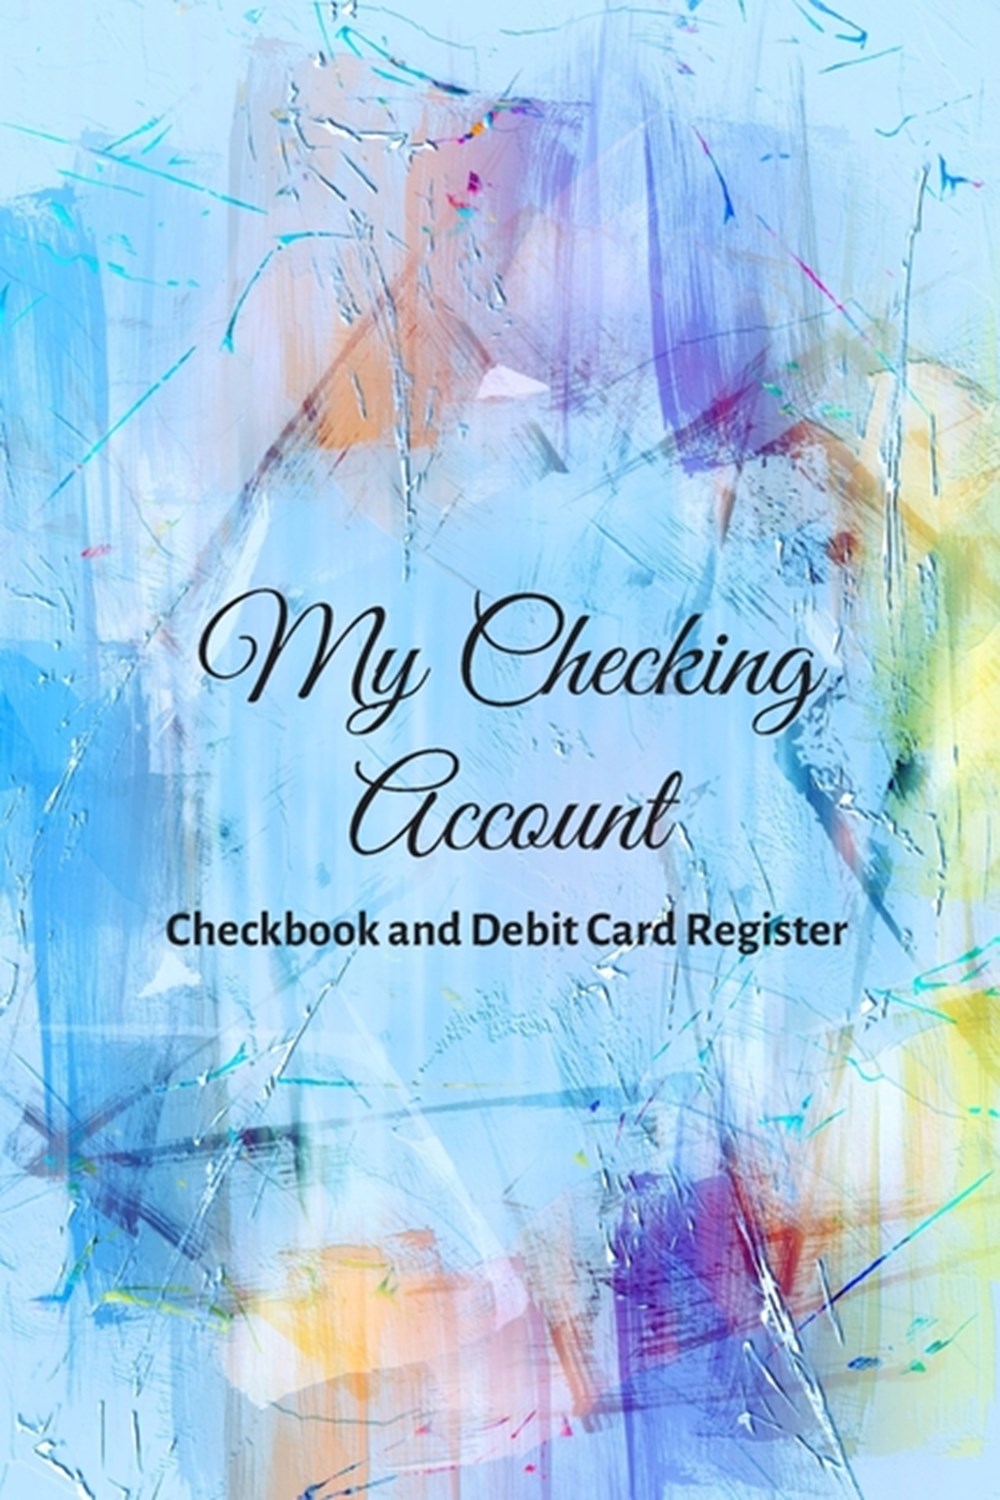 My Checking Account V.7 - Checkbook and Debit Card Register; Personal Checking Account Balance, Simp